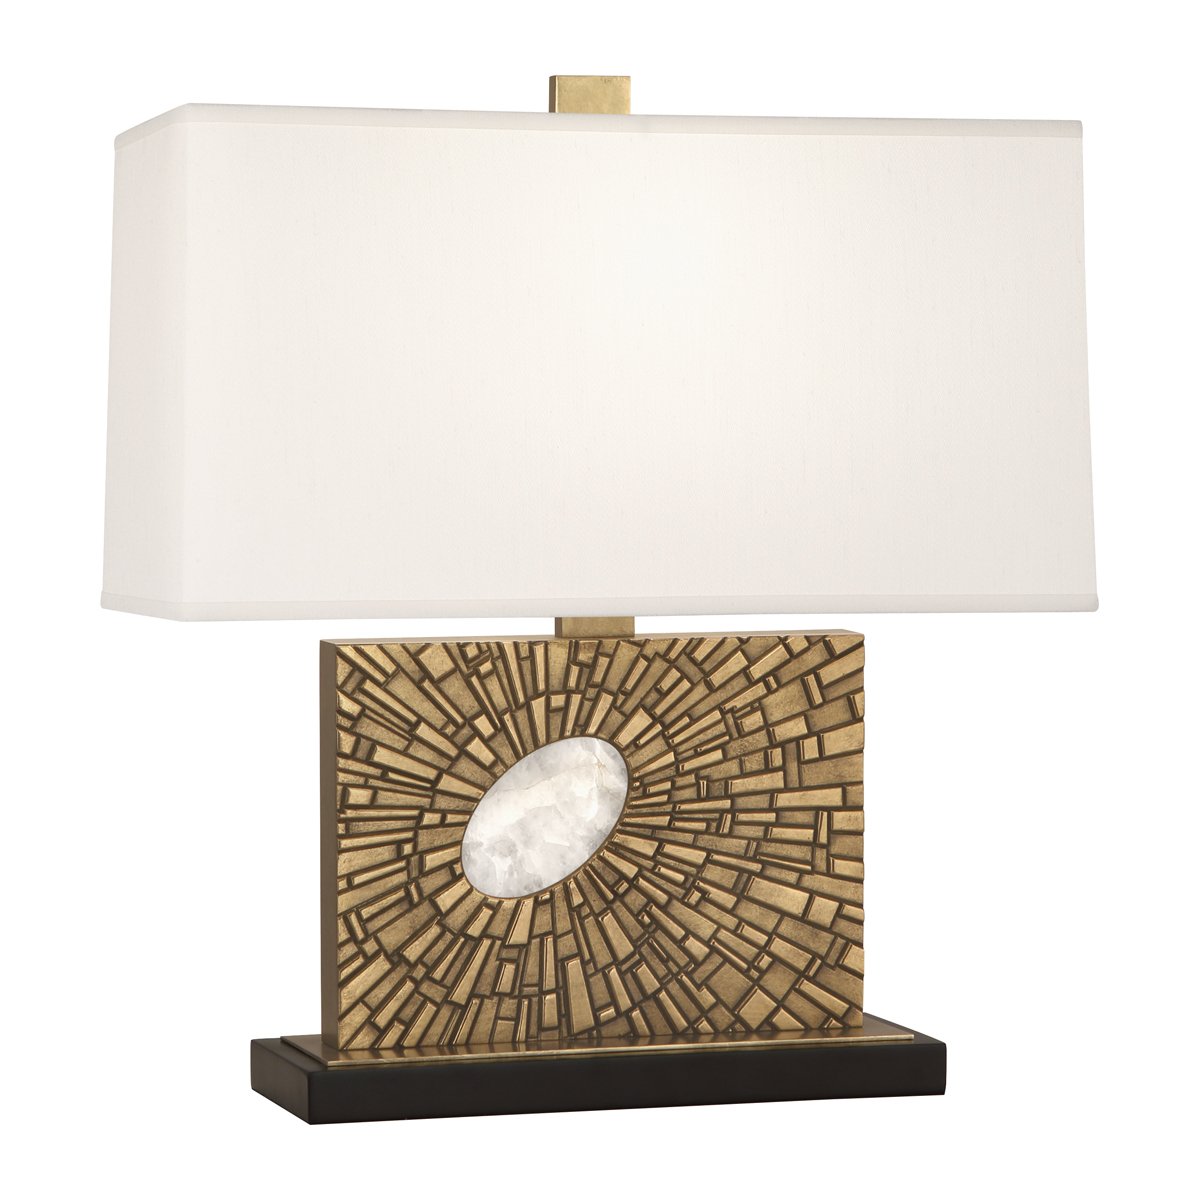 Goliath Table Lamp Style #416